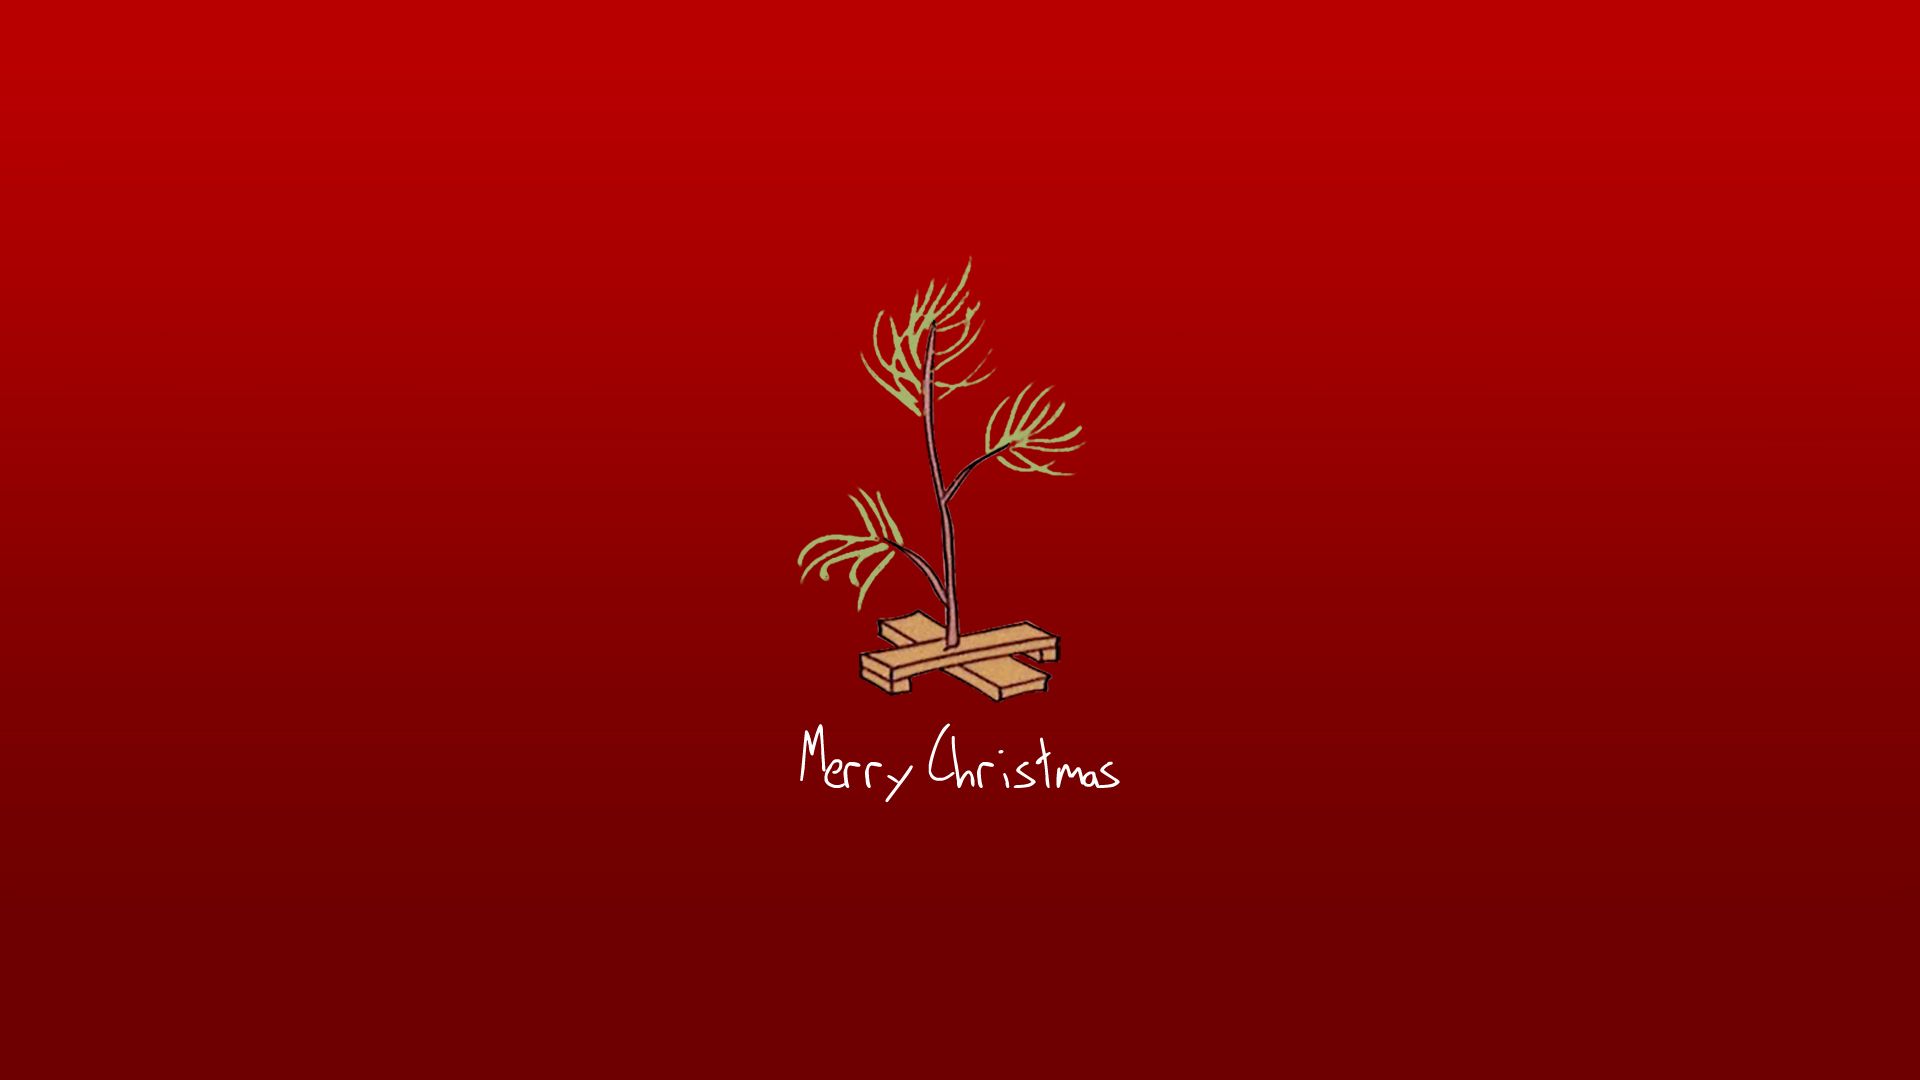 Wallpapers For Charlie Brown Christmas Tree Wallpapers